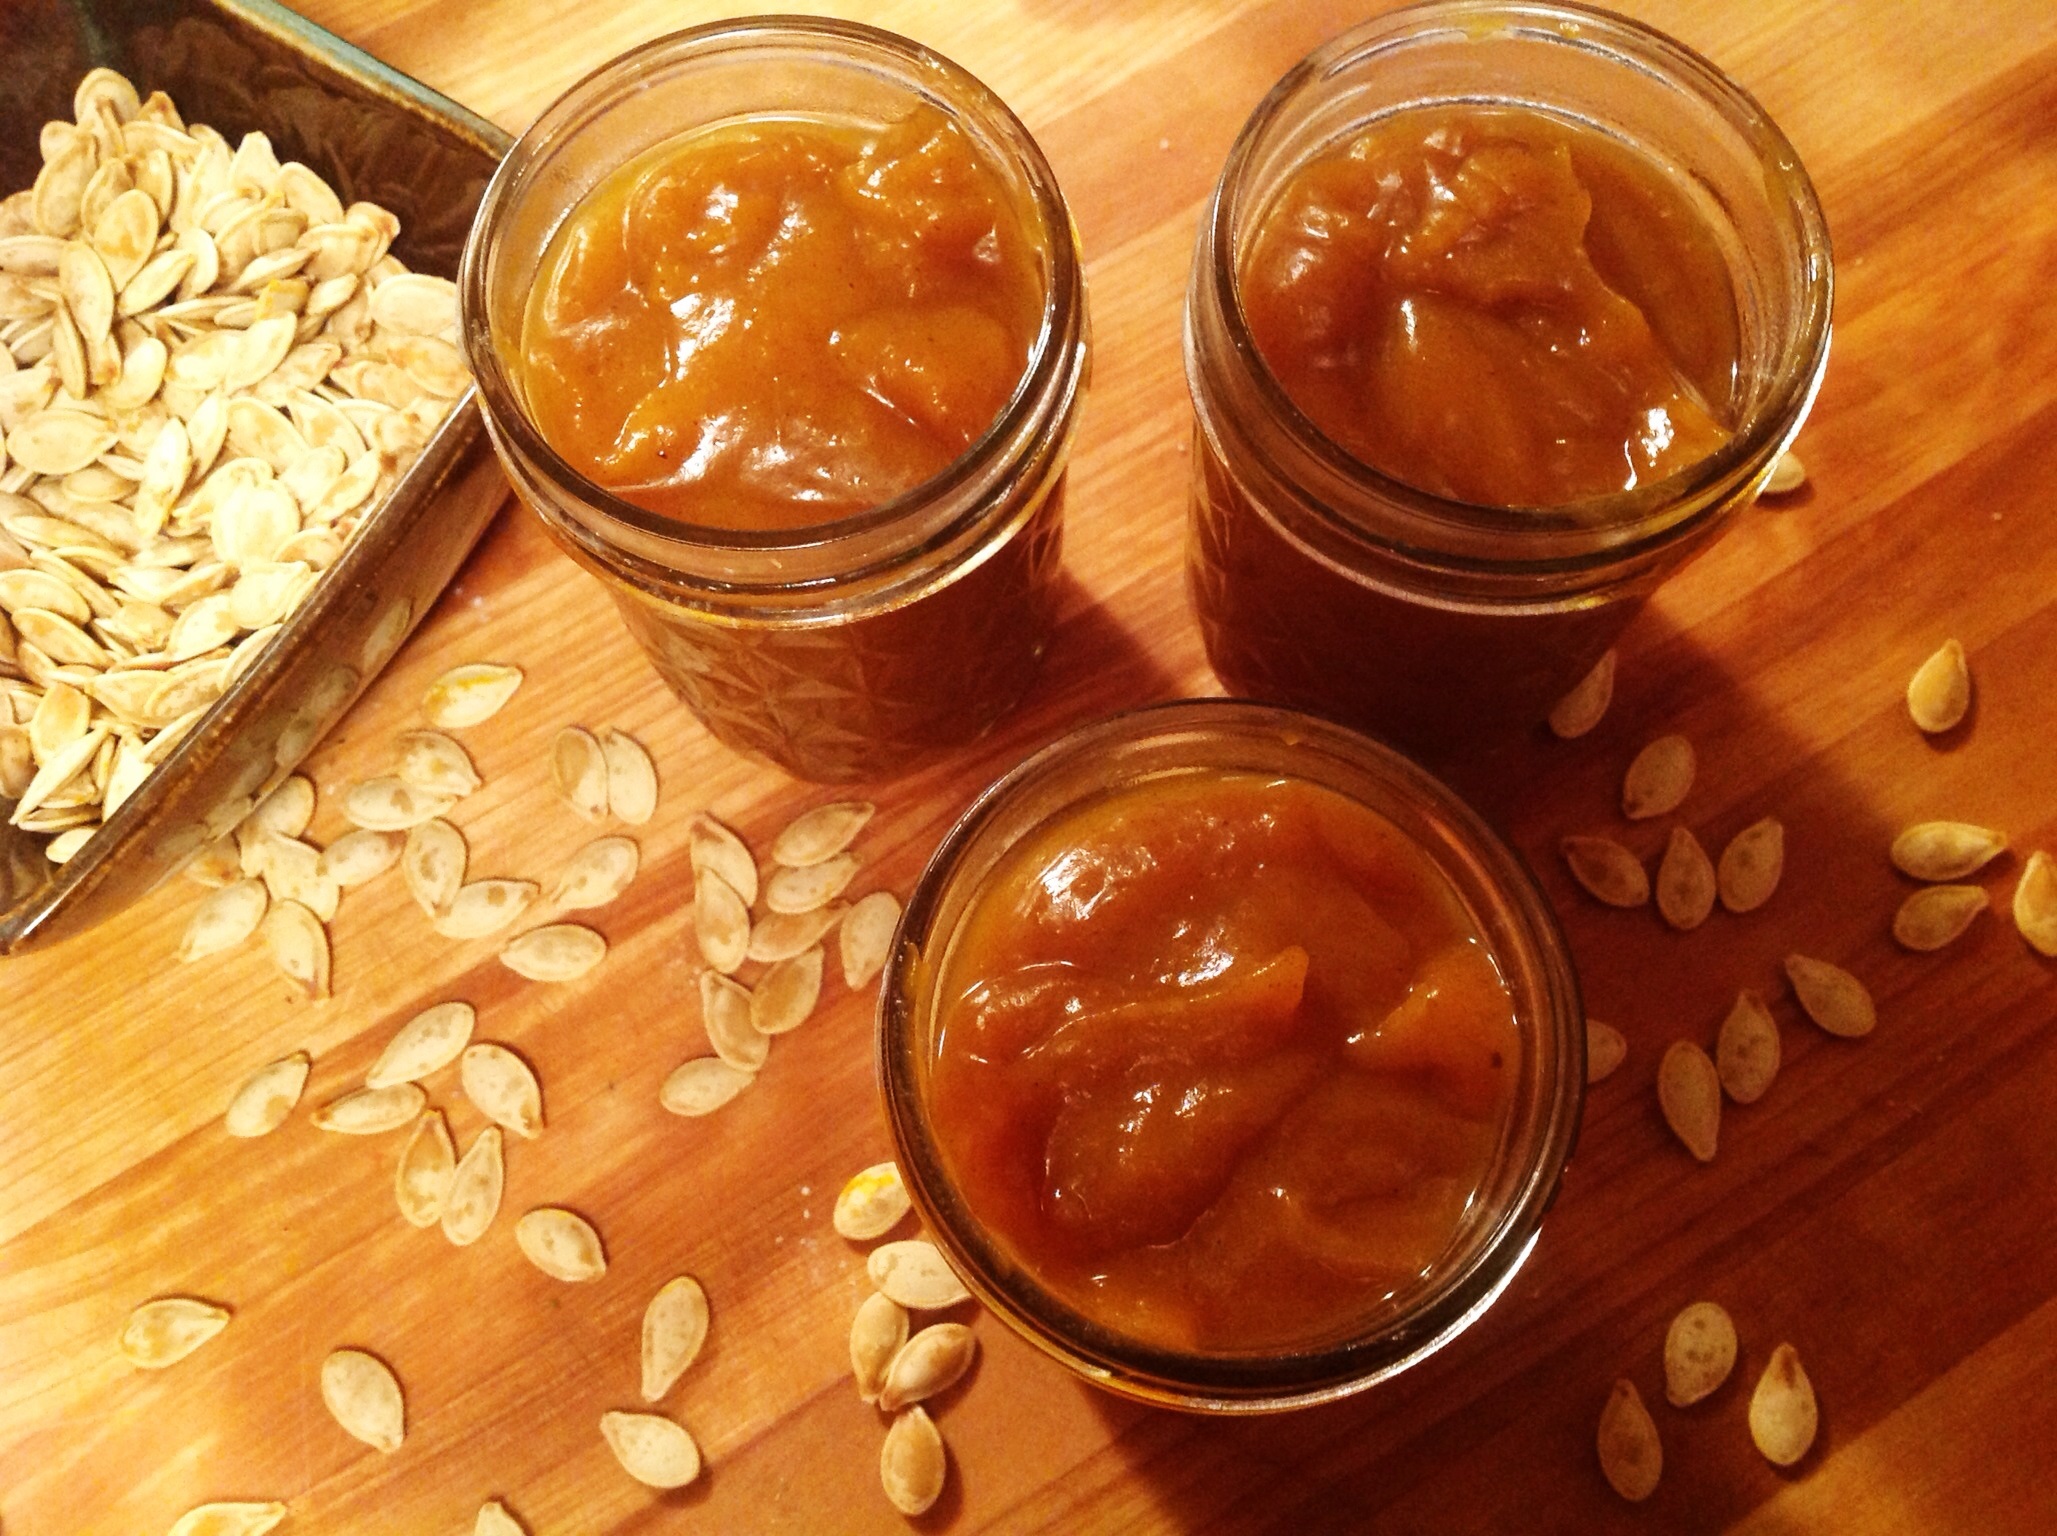 How to Make Your Own Pumpkin Butter (and Pumpkin Seeds) in 7 Easy Steps